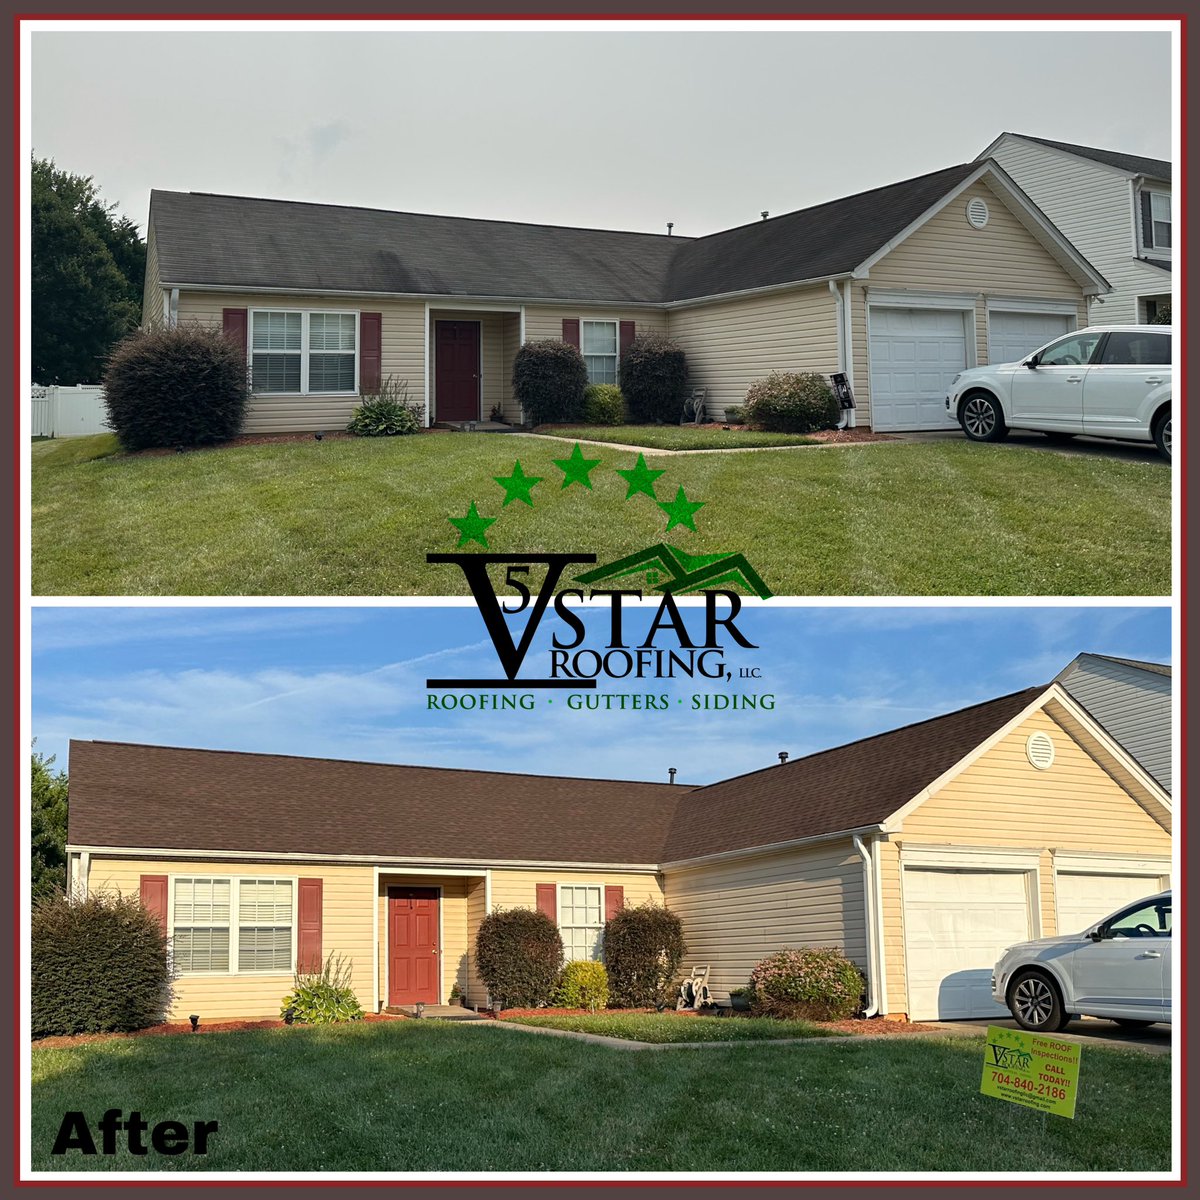 V Star Roofing!!!
.
.
#charlotte #charlottenc #clouds #clt #contractor #exploreclt #home #homedecor #homedesign #interior #interiordesign #love #nature #northcarolina #queencity #roofer #roofing #roofingcompany #roofingcontractor #roofinglife #rooftop #siding #sidingcontractor